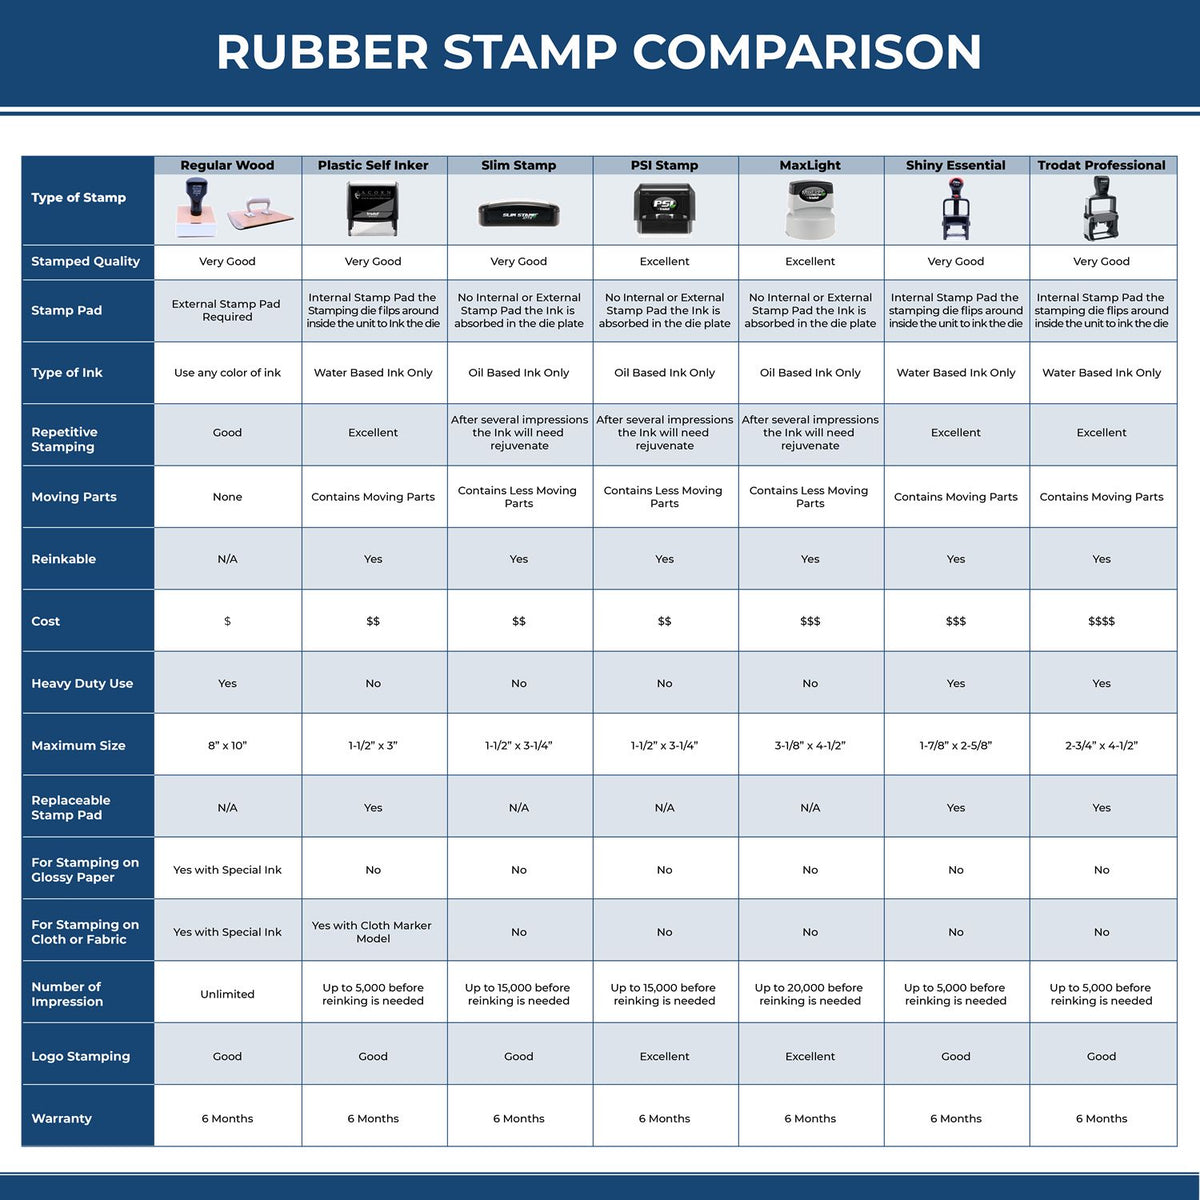 Large Self Inking Client Copy Stamp 4110S Rubber Stamp Comparison